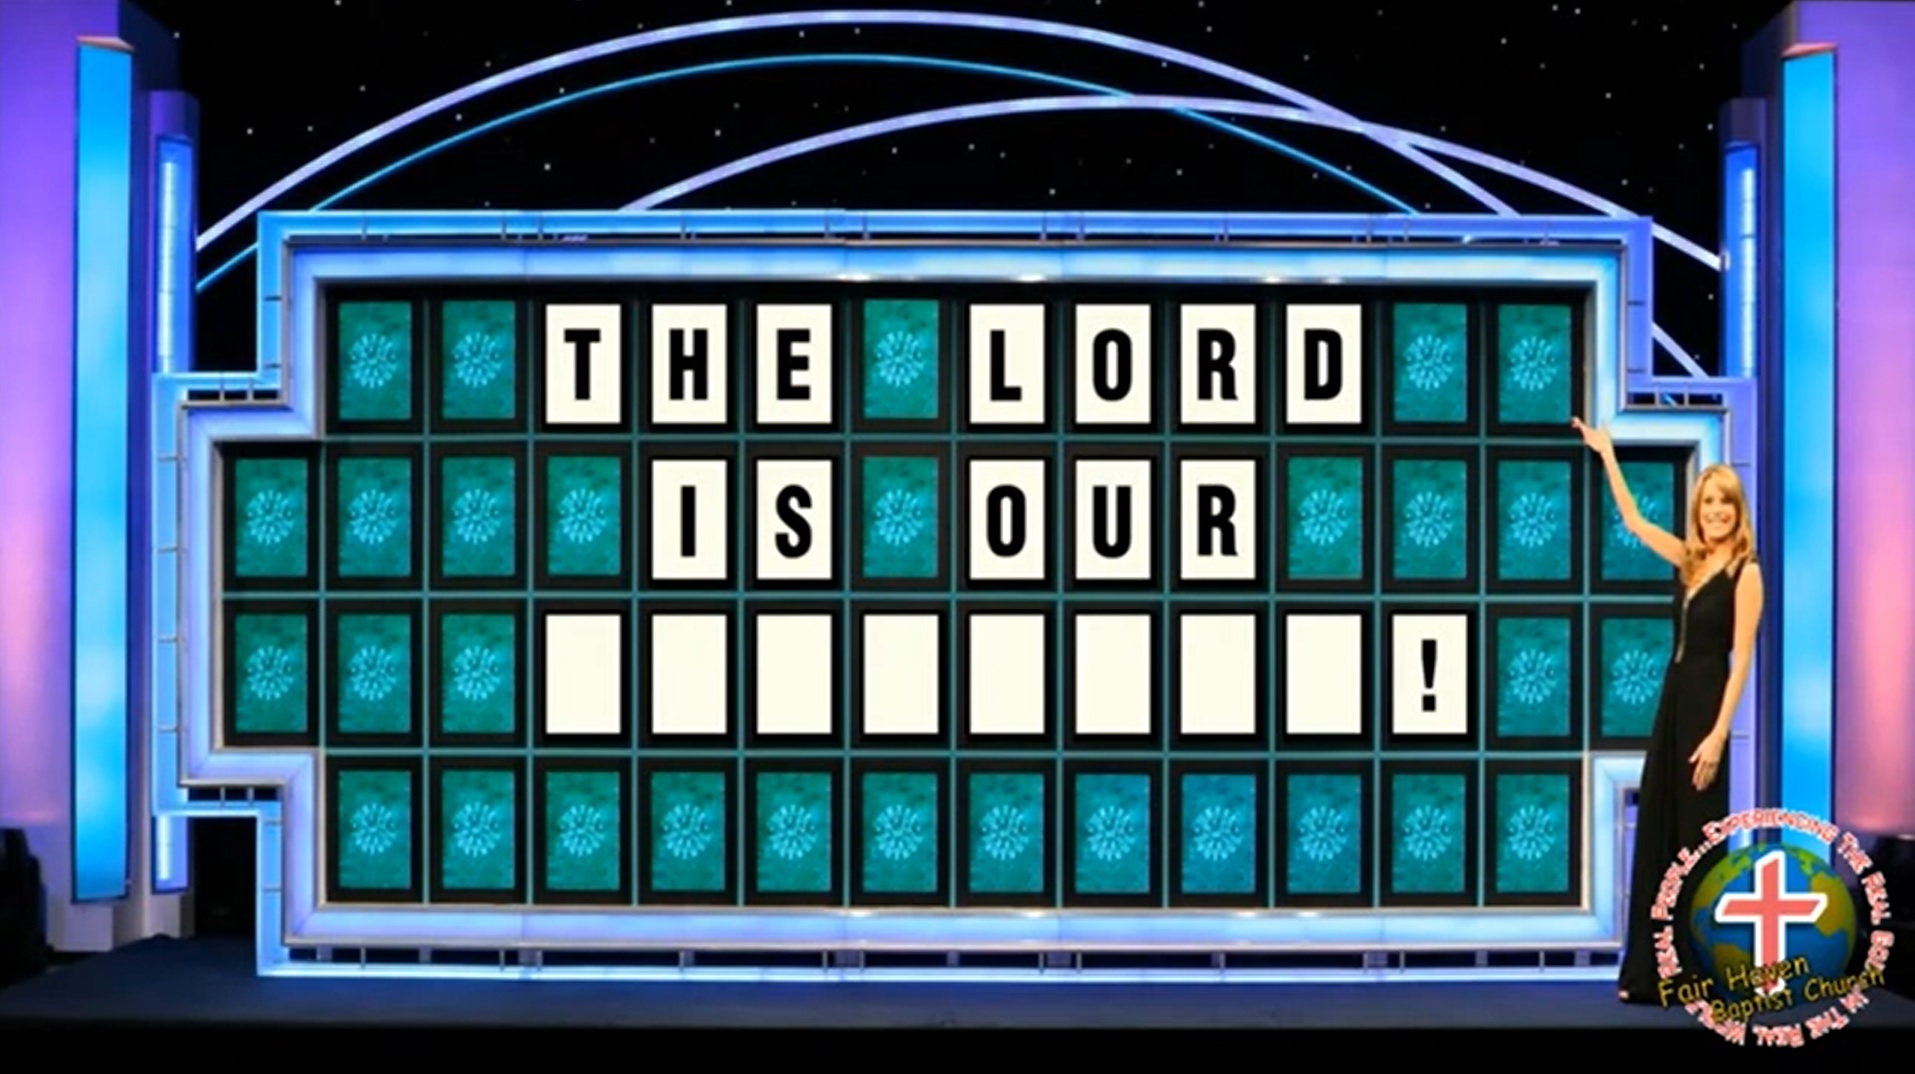 The Lord is Our 